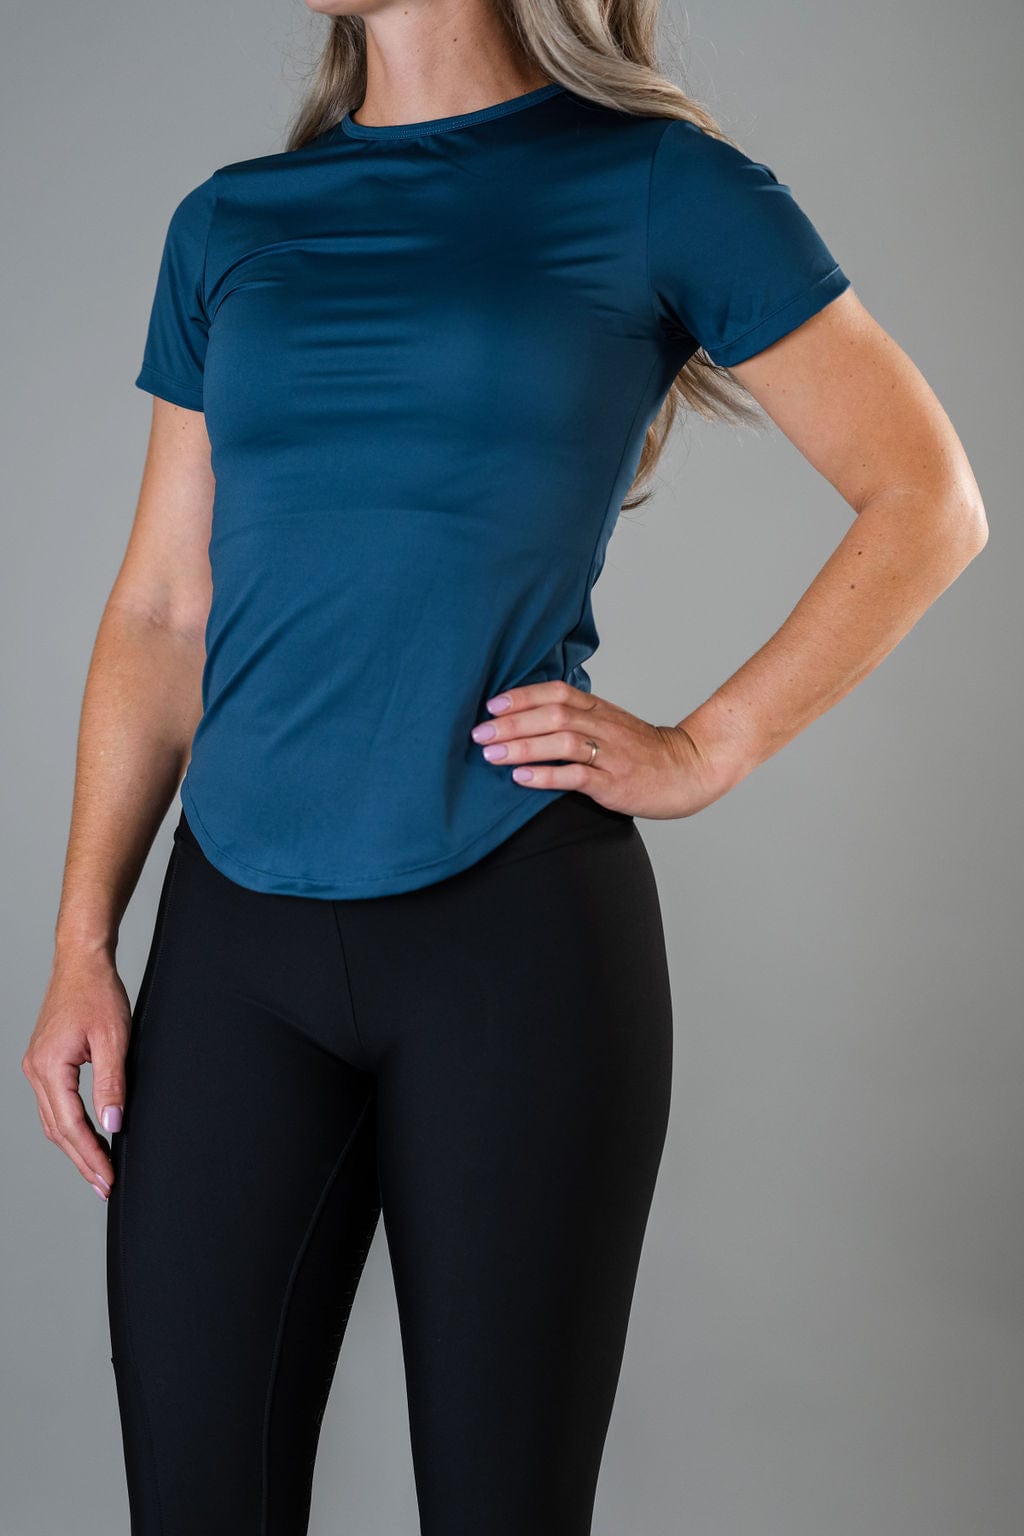 Emerald Blue Relaxed Athletic Top Short sleeve